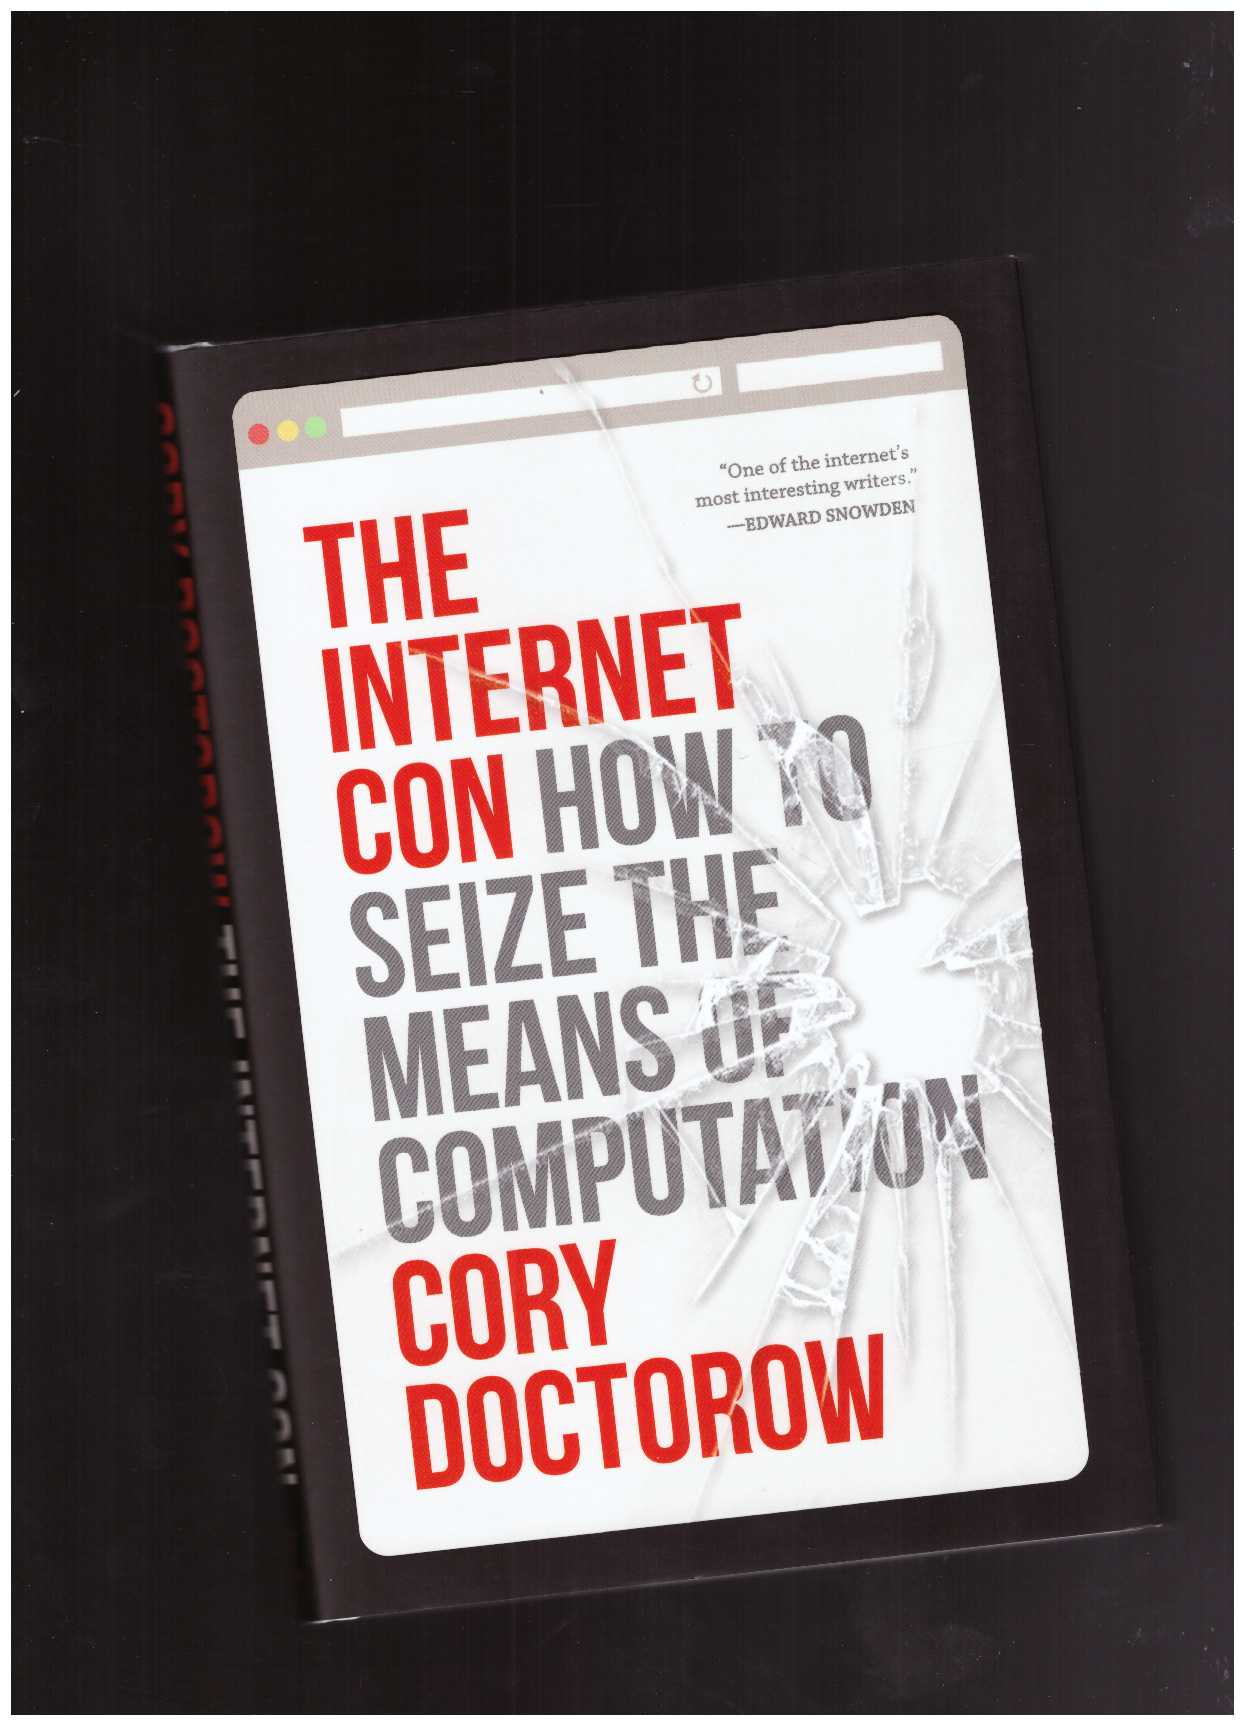 DOCTOROW, Cory - The Internet Con. How to Seize the Means of Computation